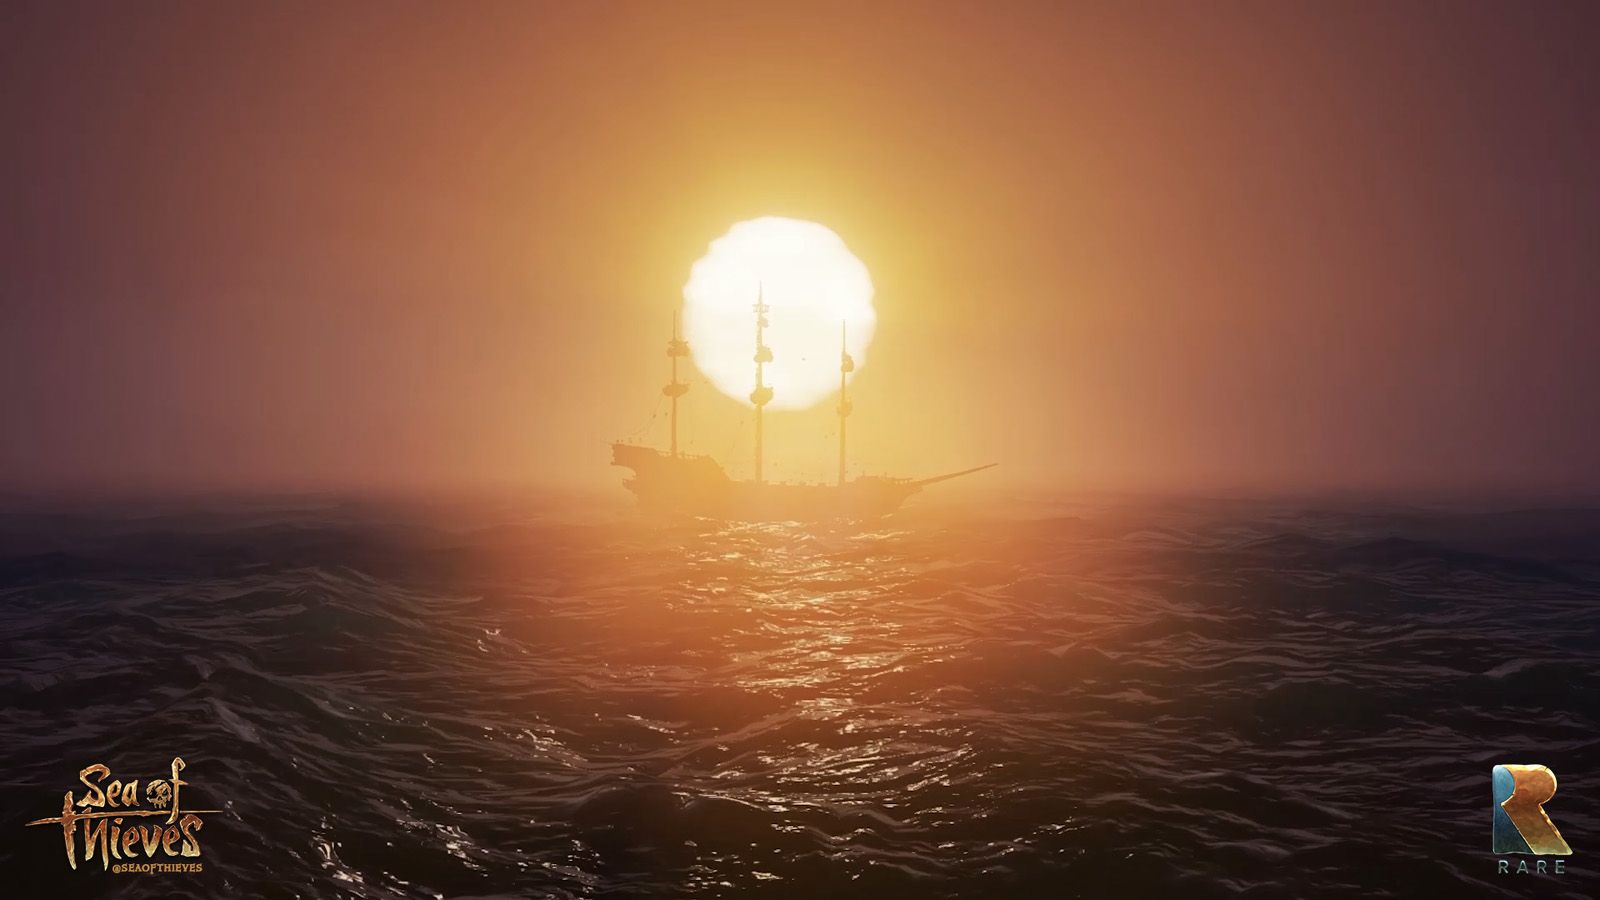 sea of thieves preview image 1